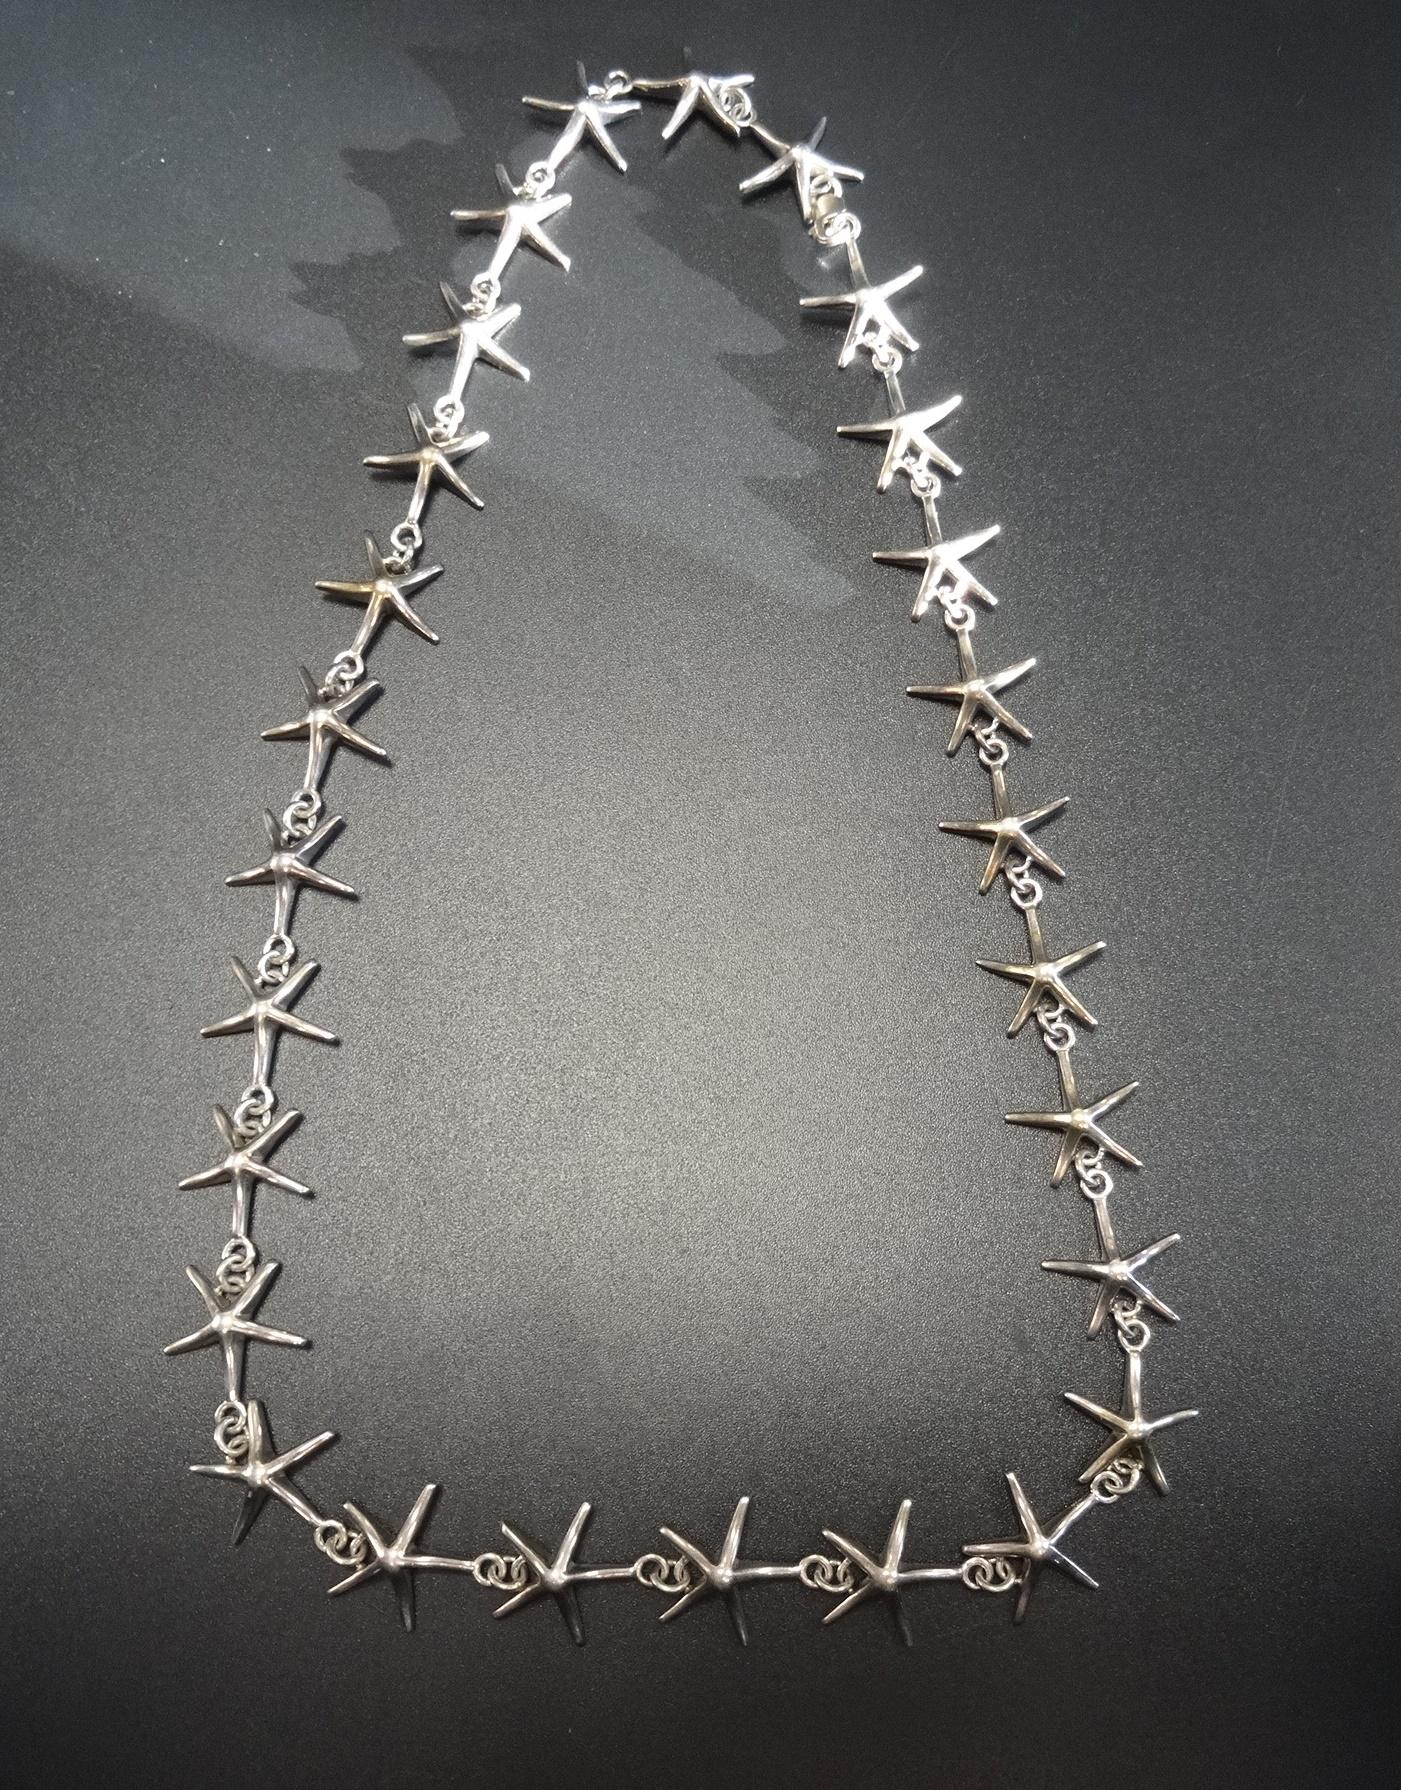 SILVER TIFFANY STYLE NECKLACE formed of starfish shaped links, 51cm long